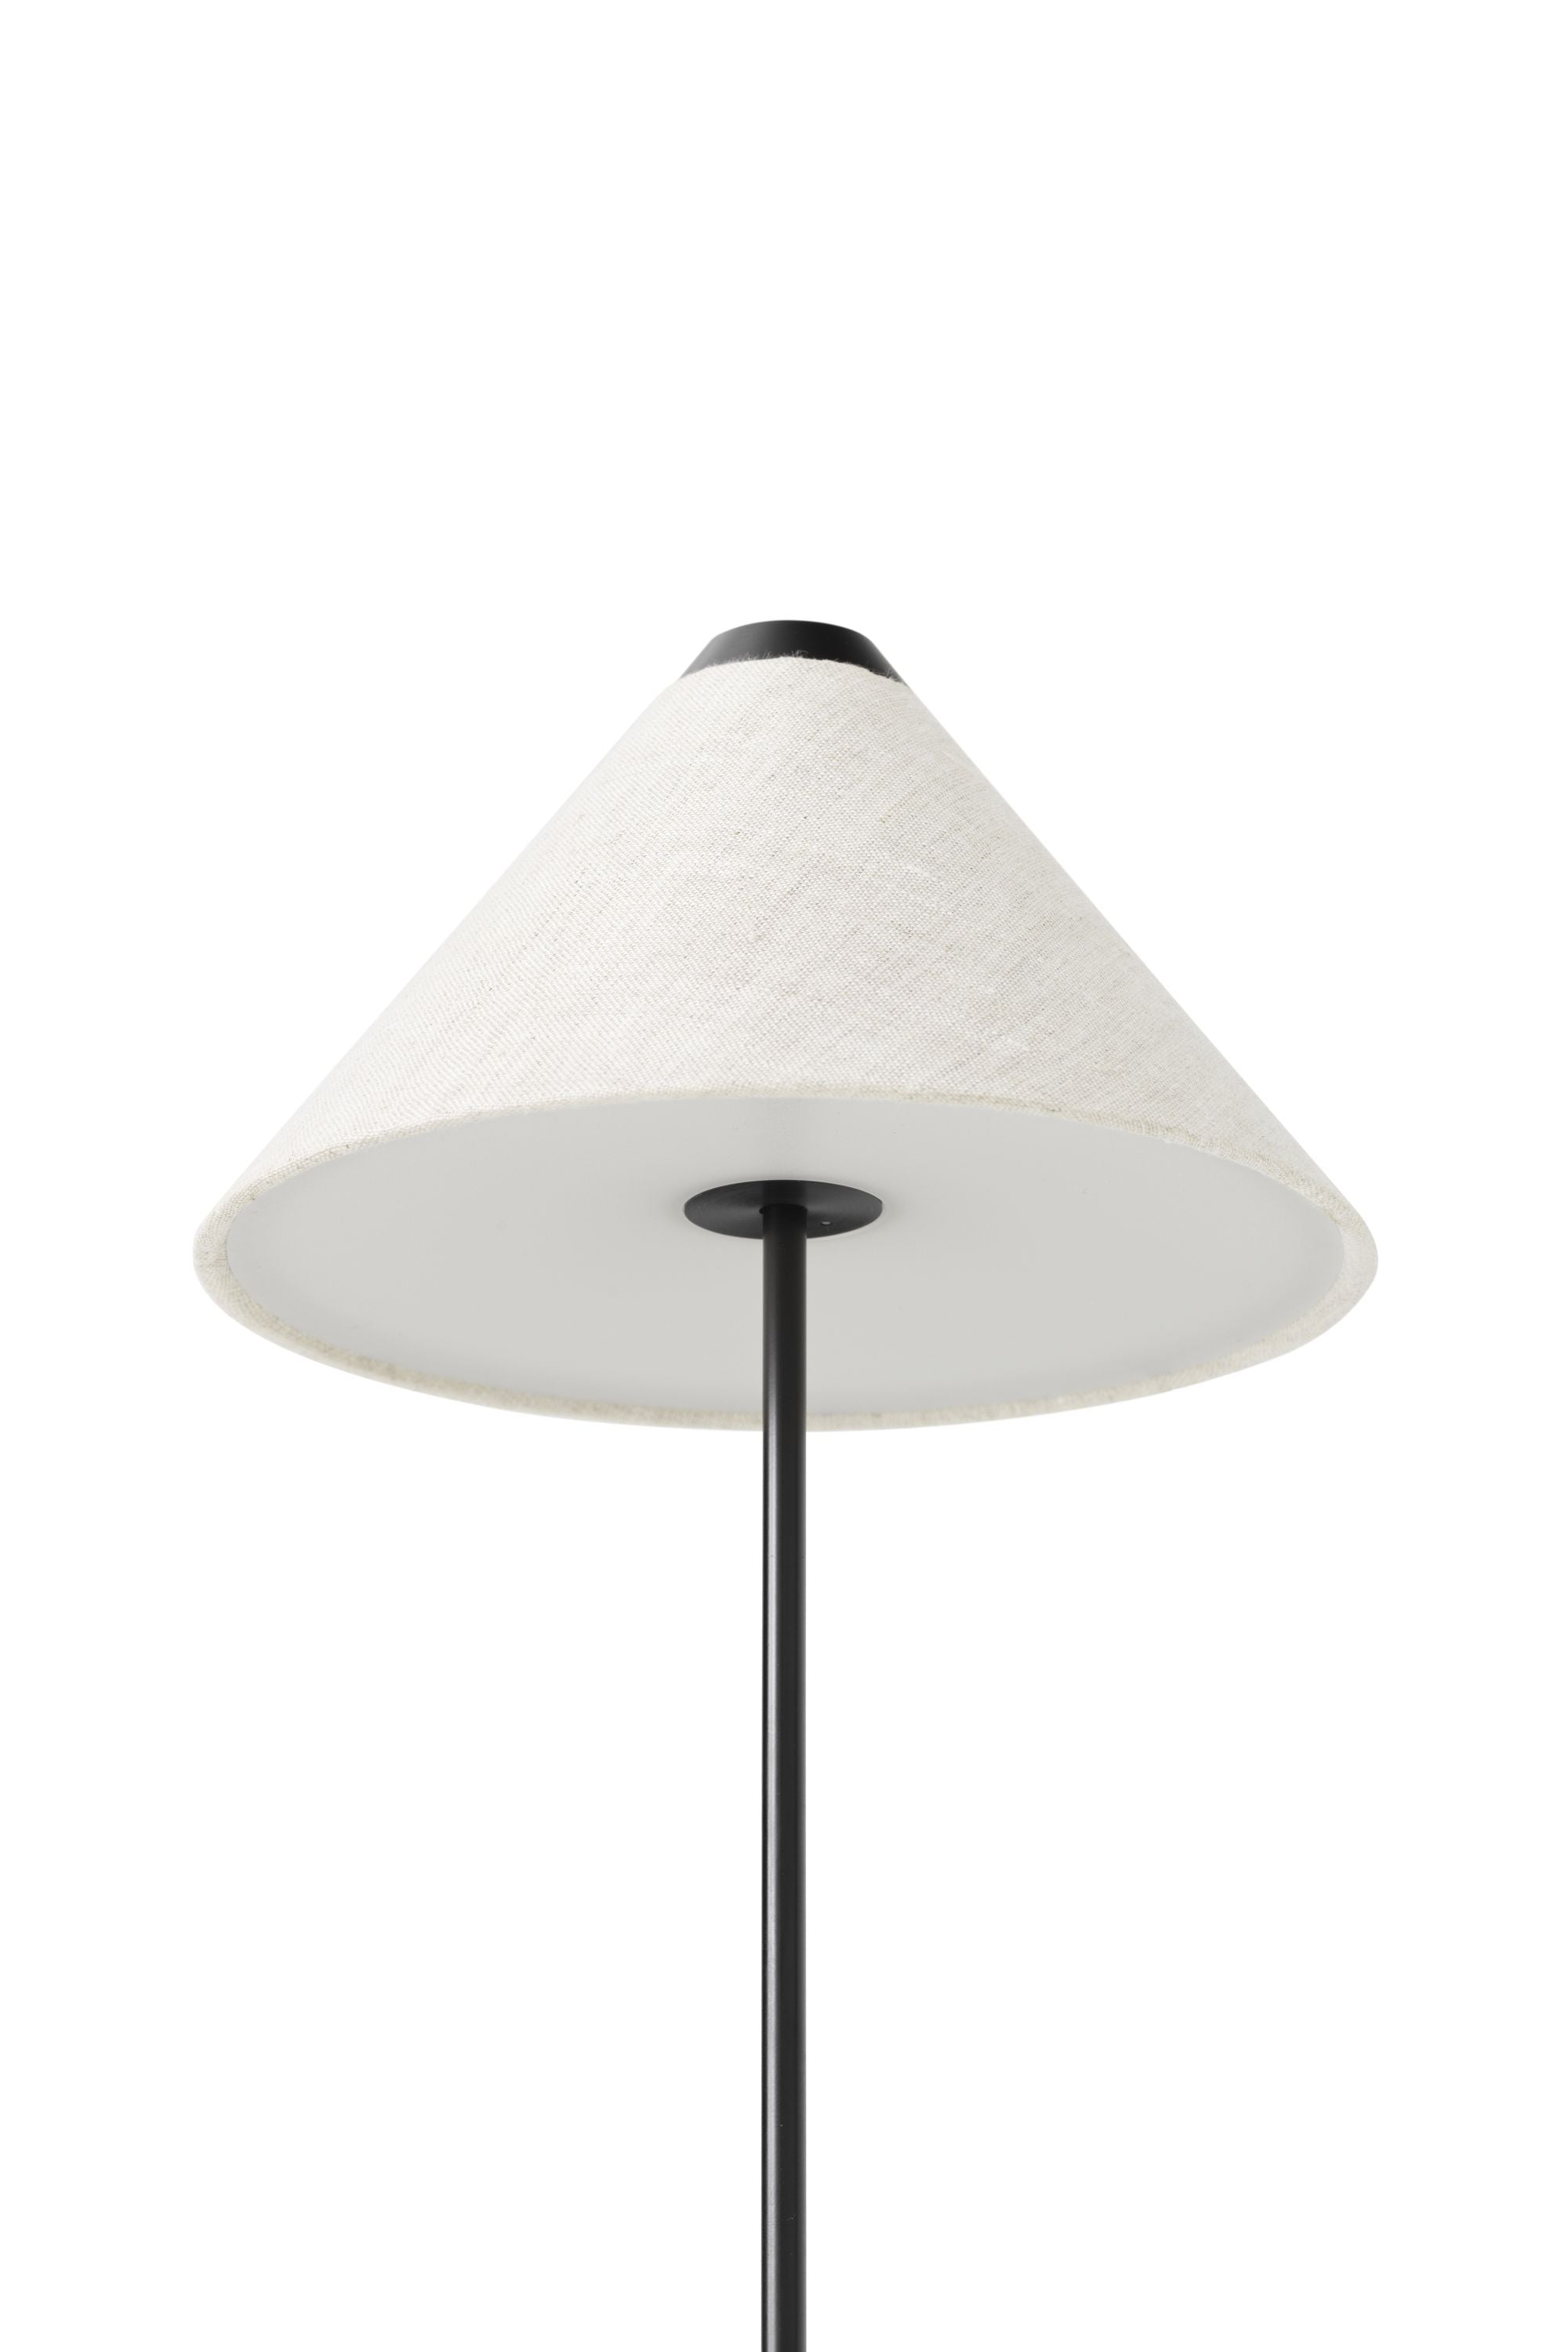 New Works Brolly Portable Table Lamp, linned